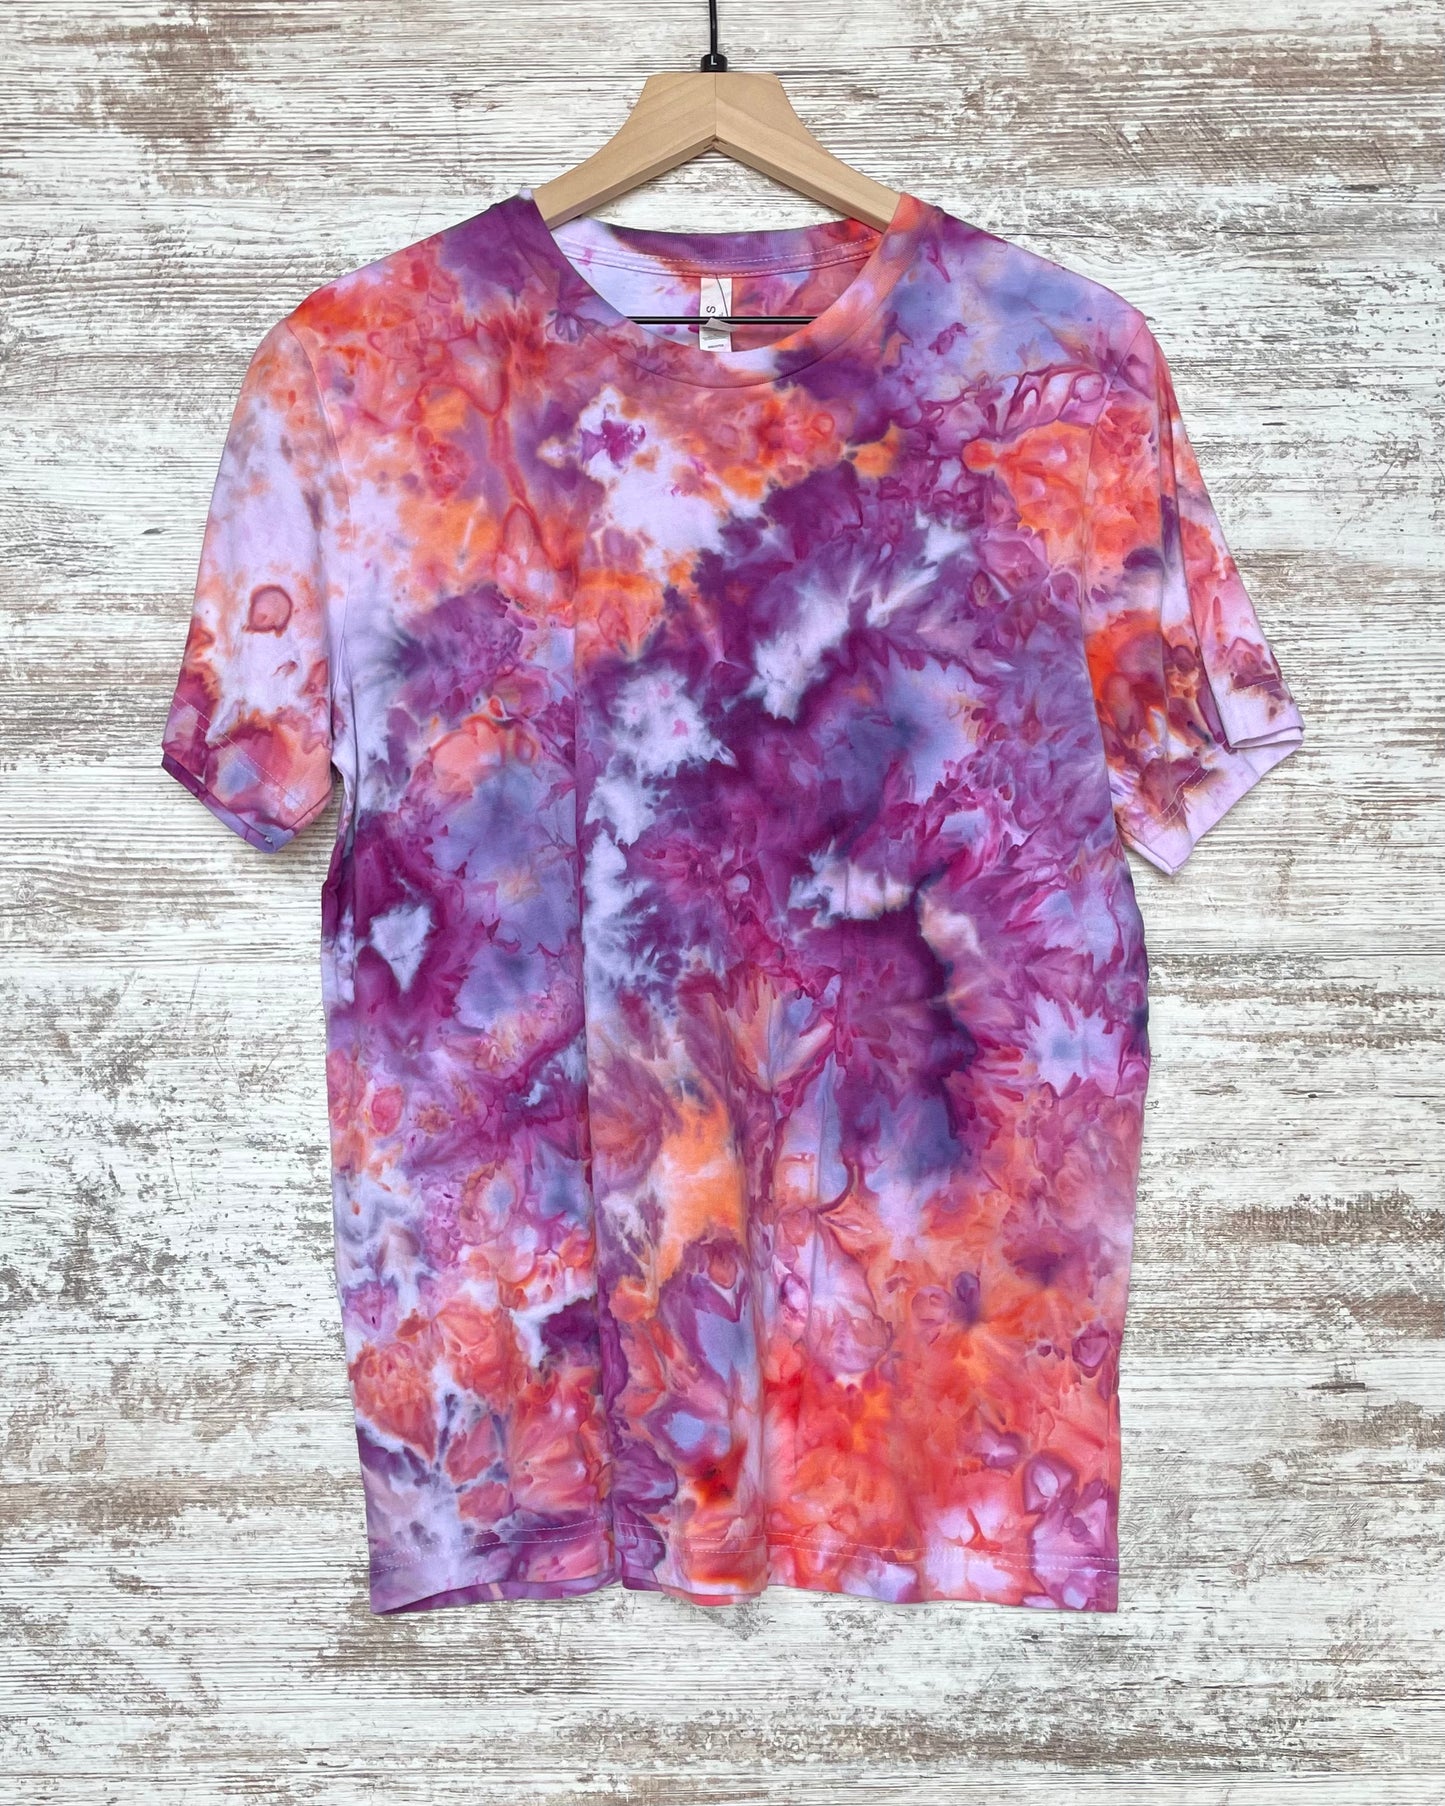 Coral & Plum Ice-Dyed Adult Unisex T-shirt